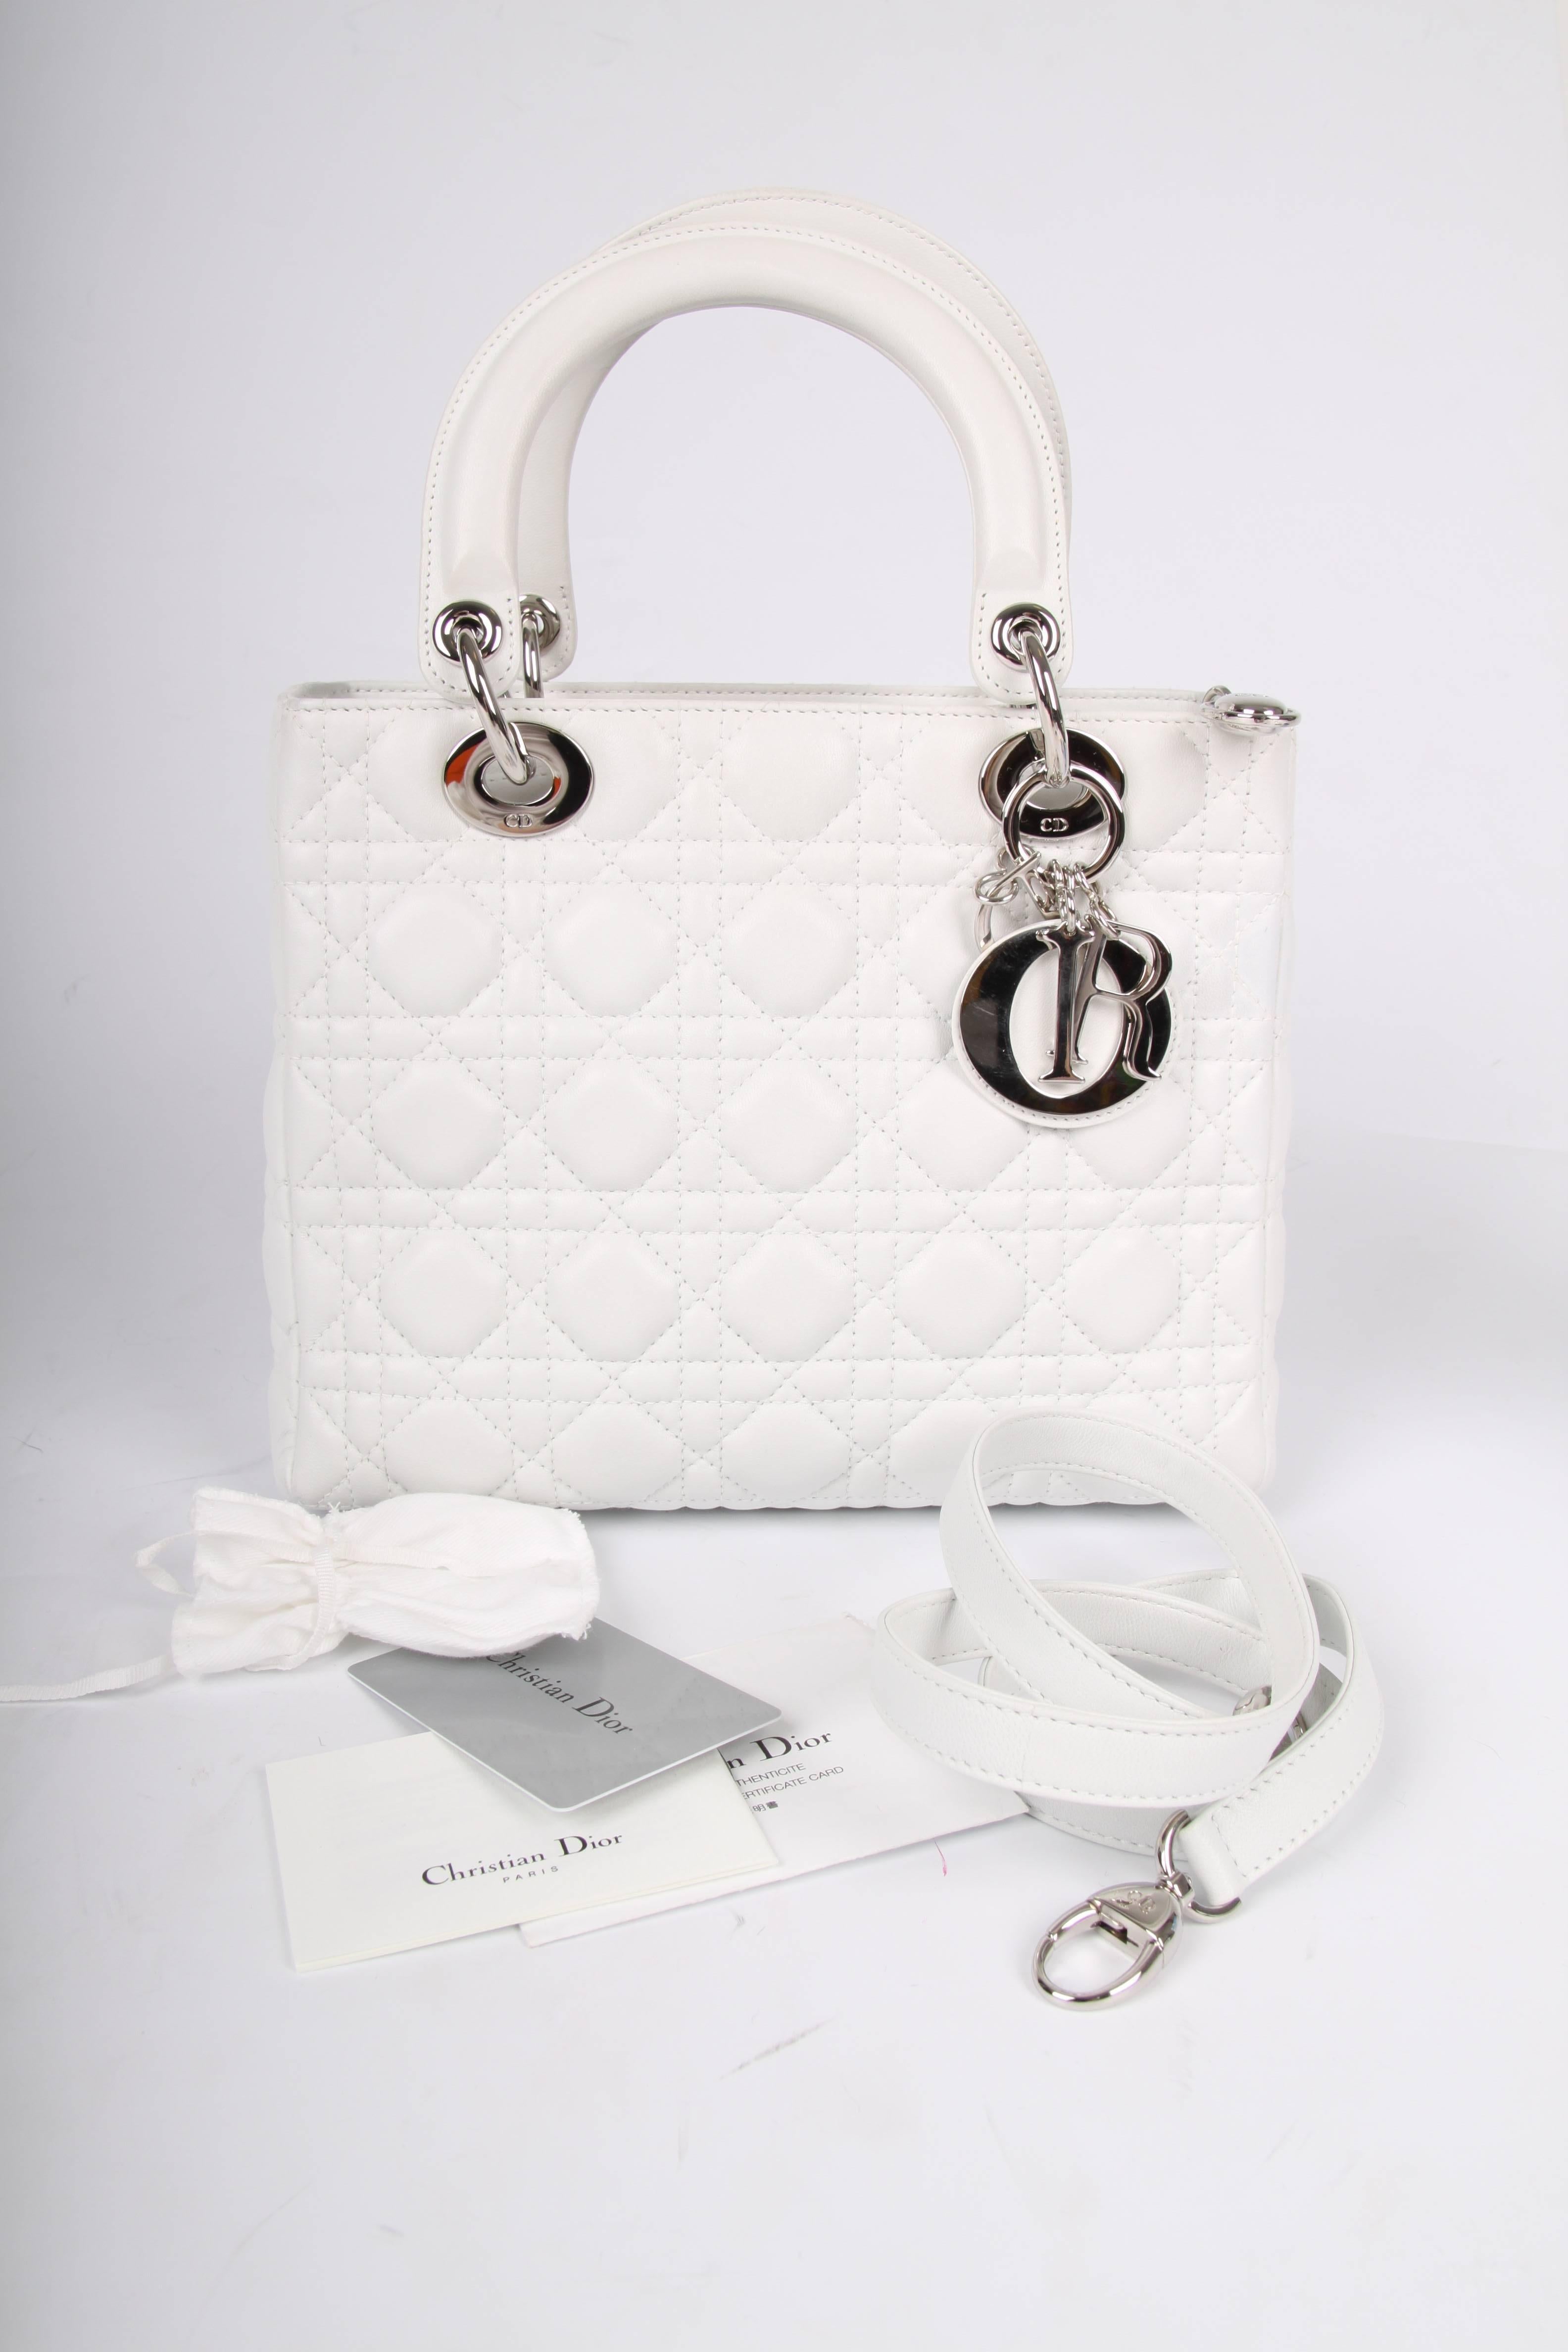 Oooh la laaaa! A marvellous bag by Dior... The My Lady Dior Bag!

This cutie comes with dustdag, clochette for the charms, care booklet and authenticity card. You name it!

Made of smooth white lambskin leather, quilted in the famous diamond